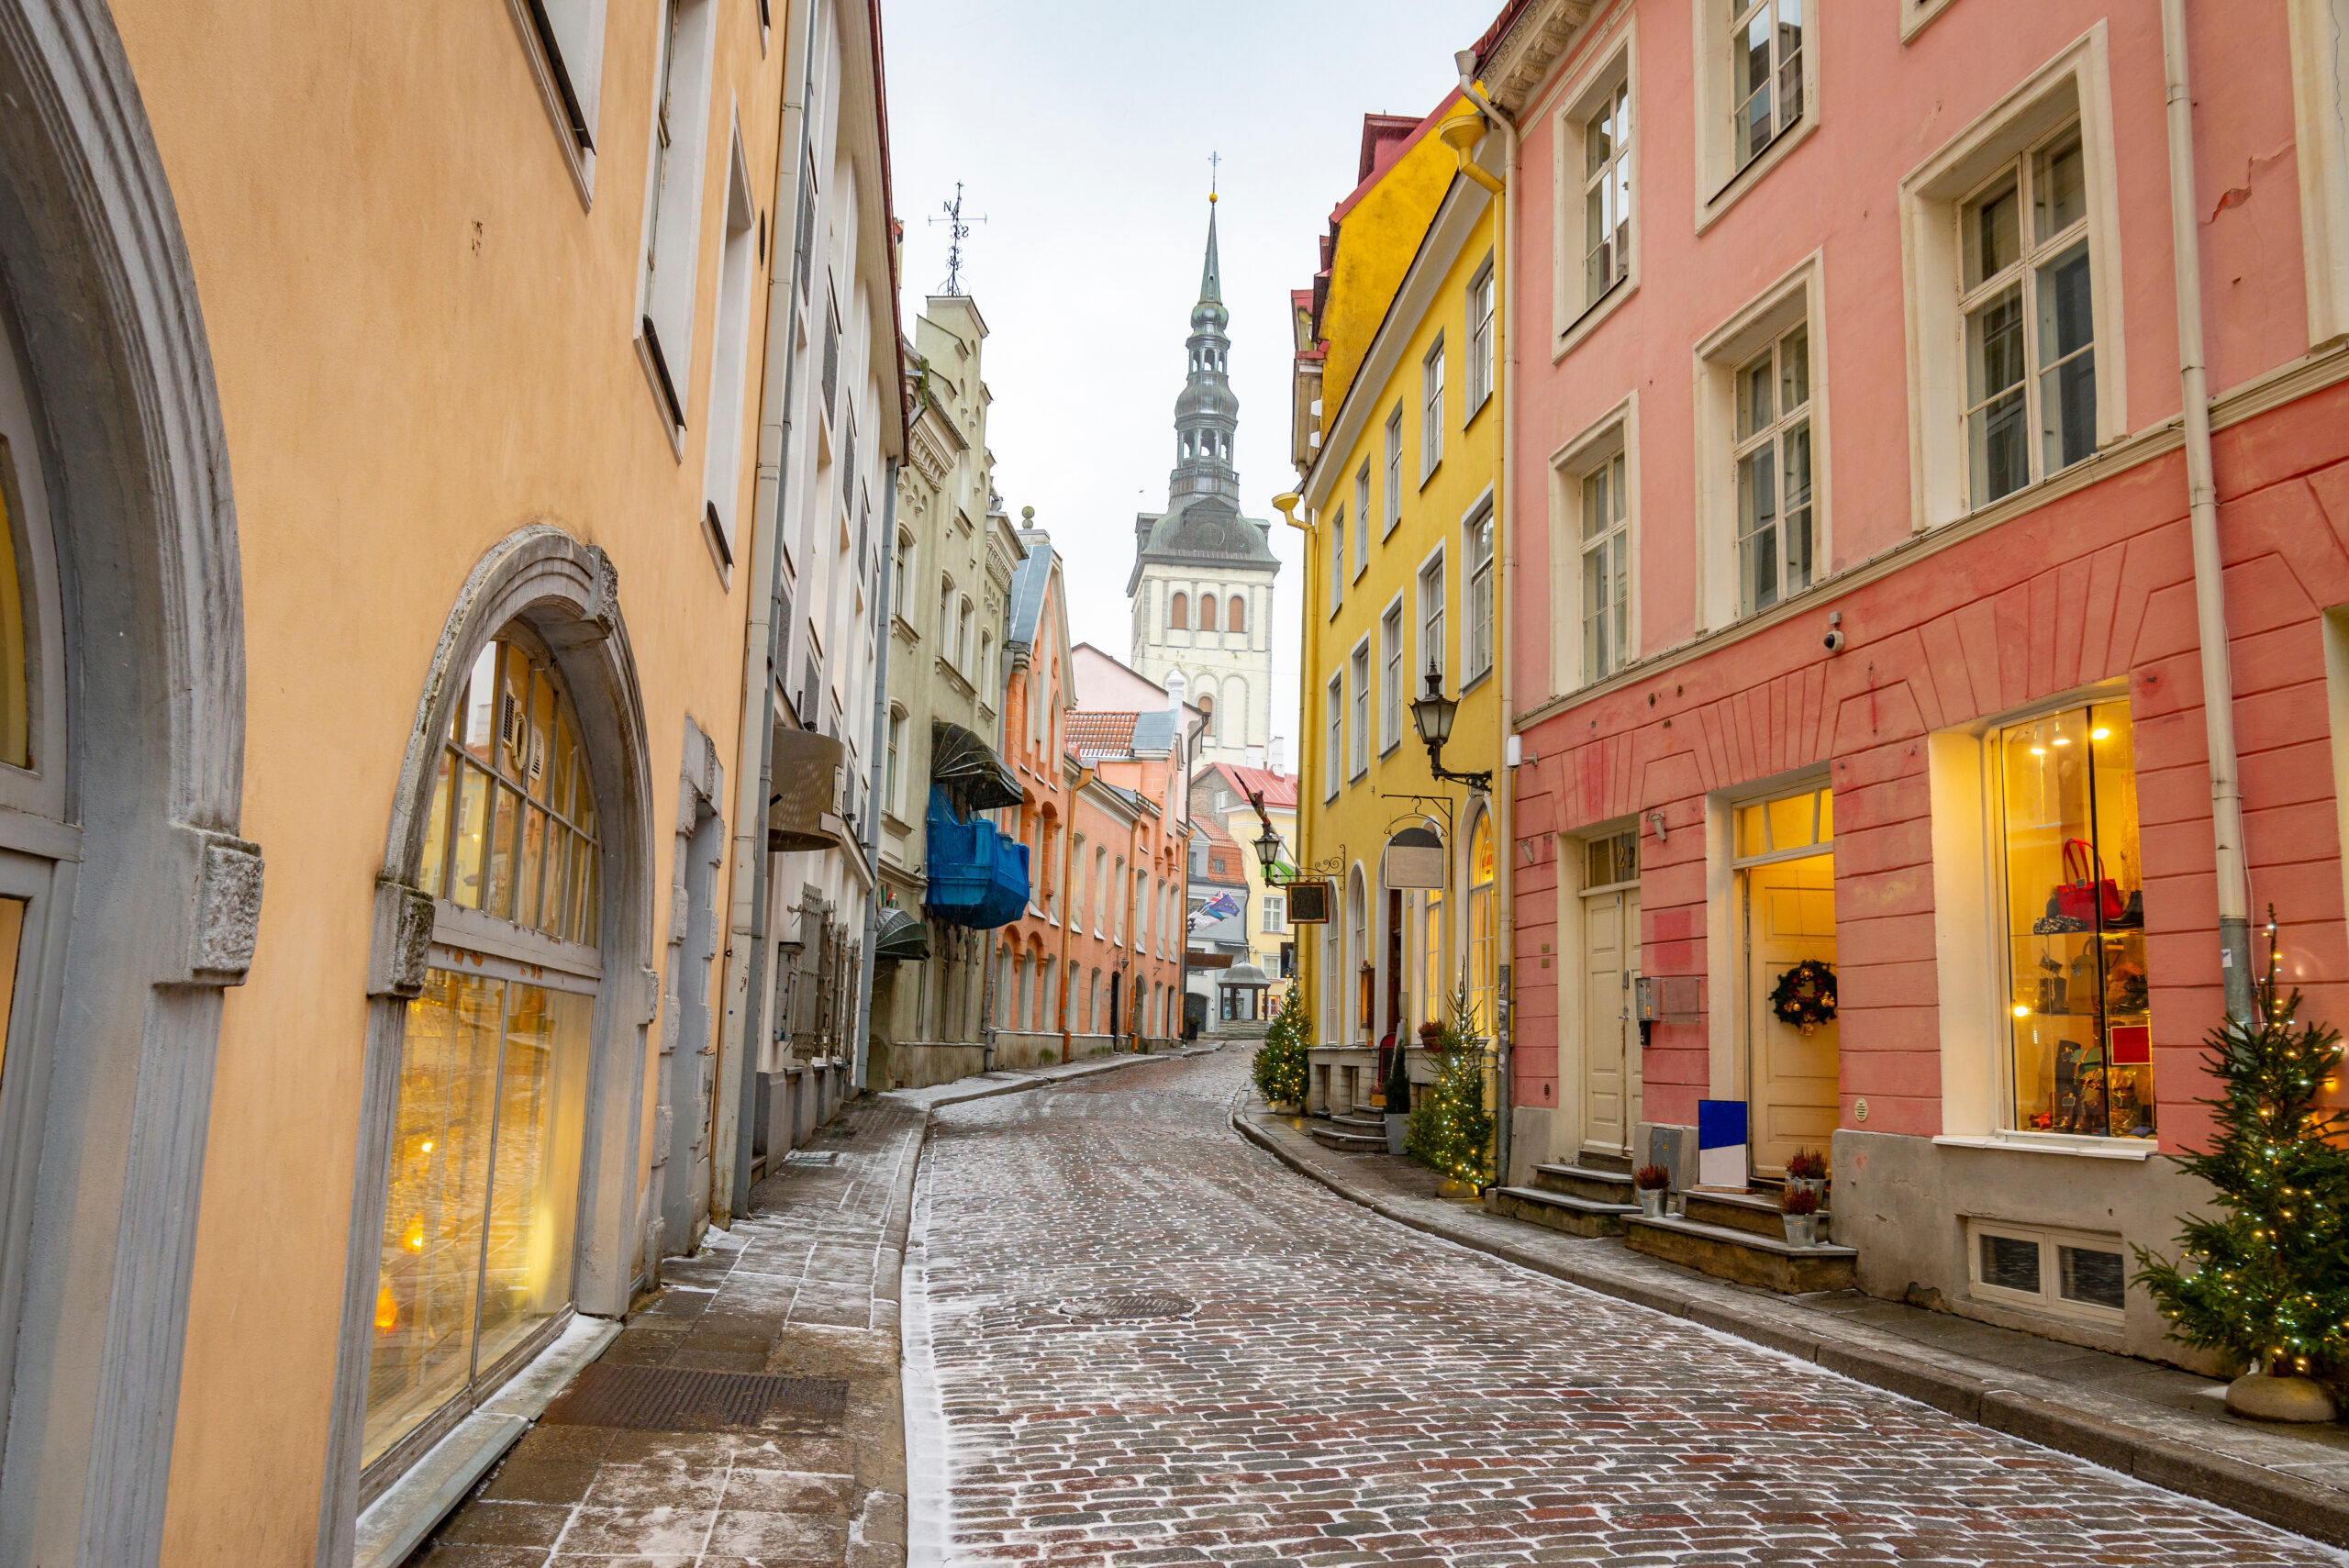 A narrow street in old town on a cold winter day in Estonia. It shows colourful houses and a church in the background.